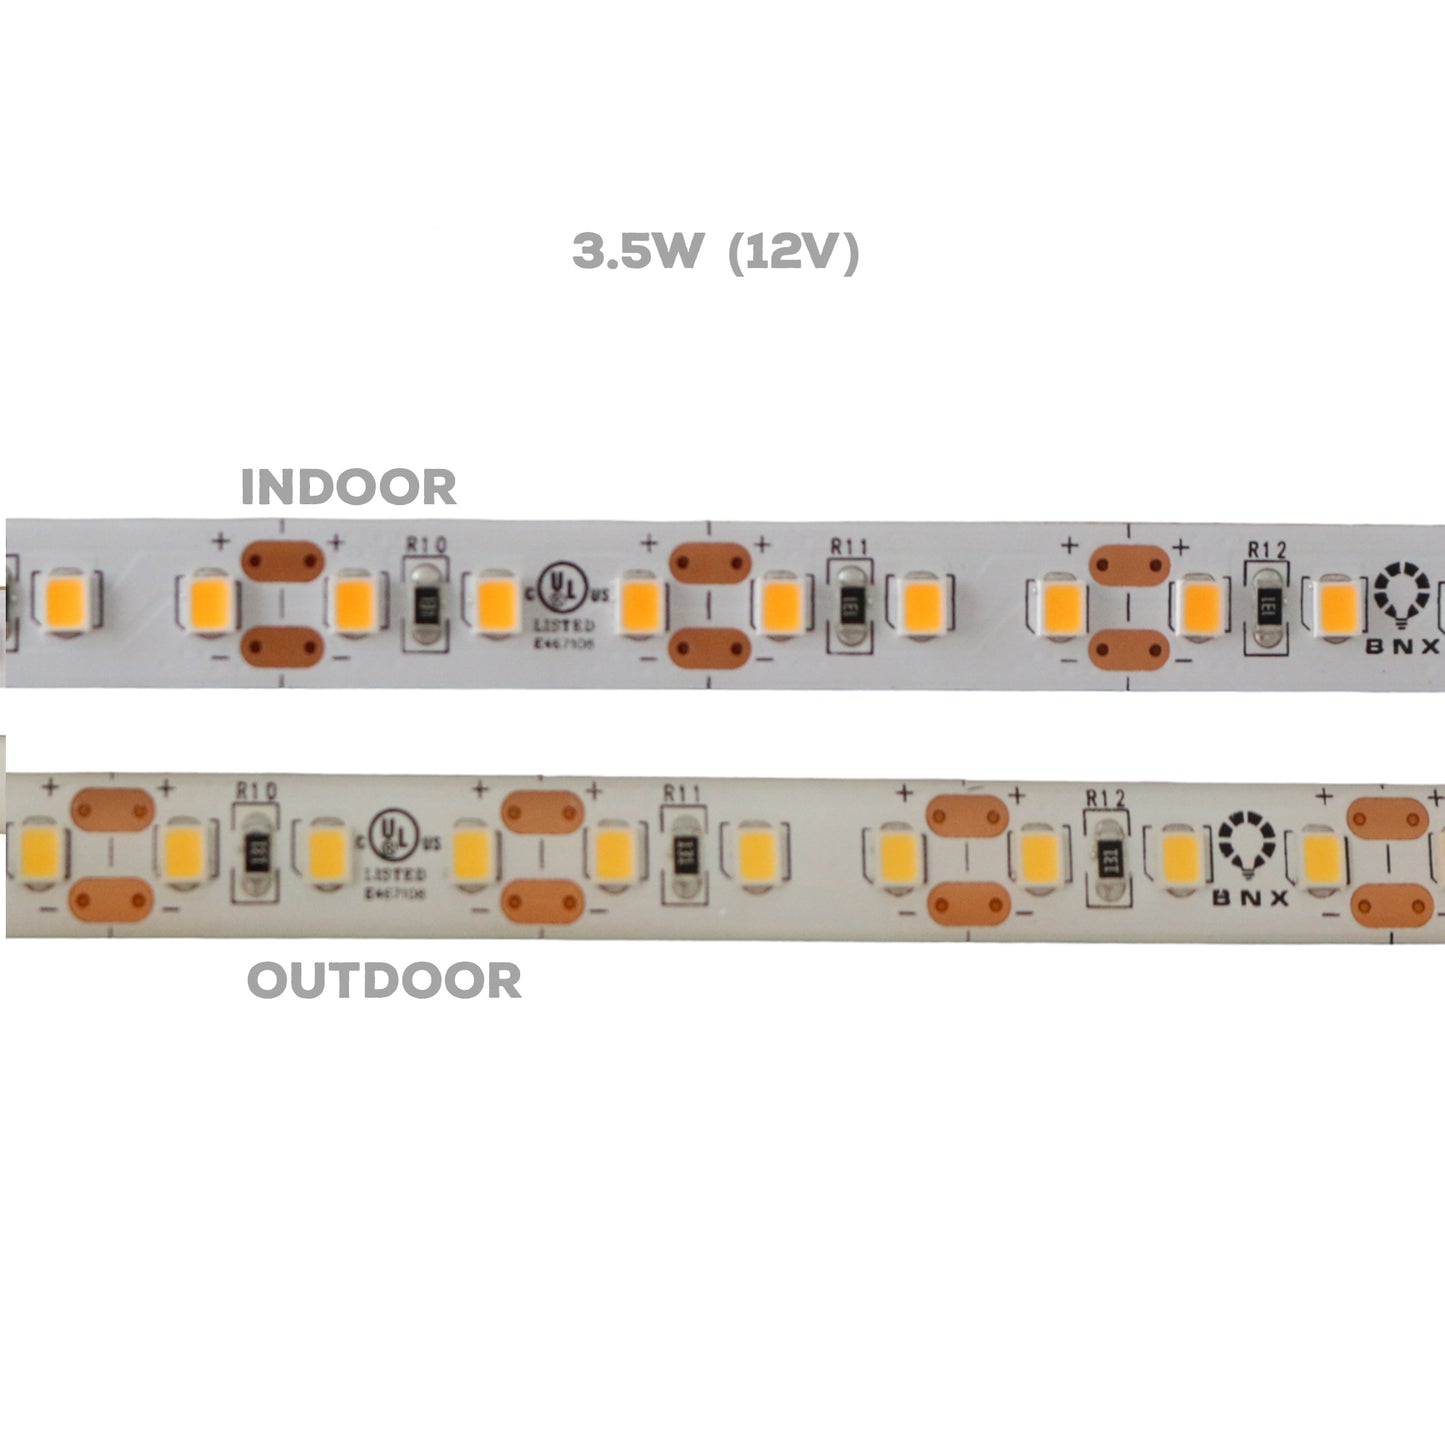 Dimmable Single Color LED Strip Lights 12V, 3.5W - IP20 (Indoor)/IP65 (Outdoor), UL Certified